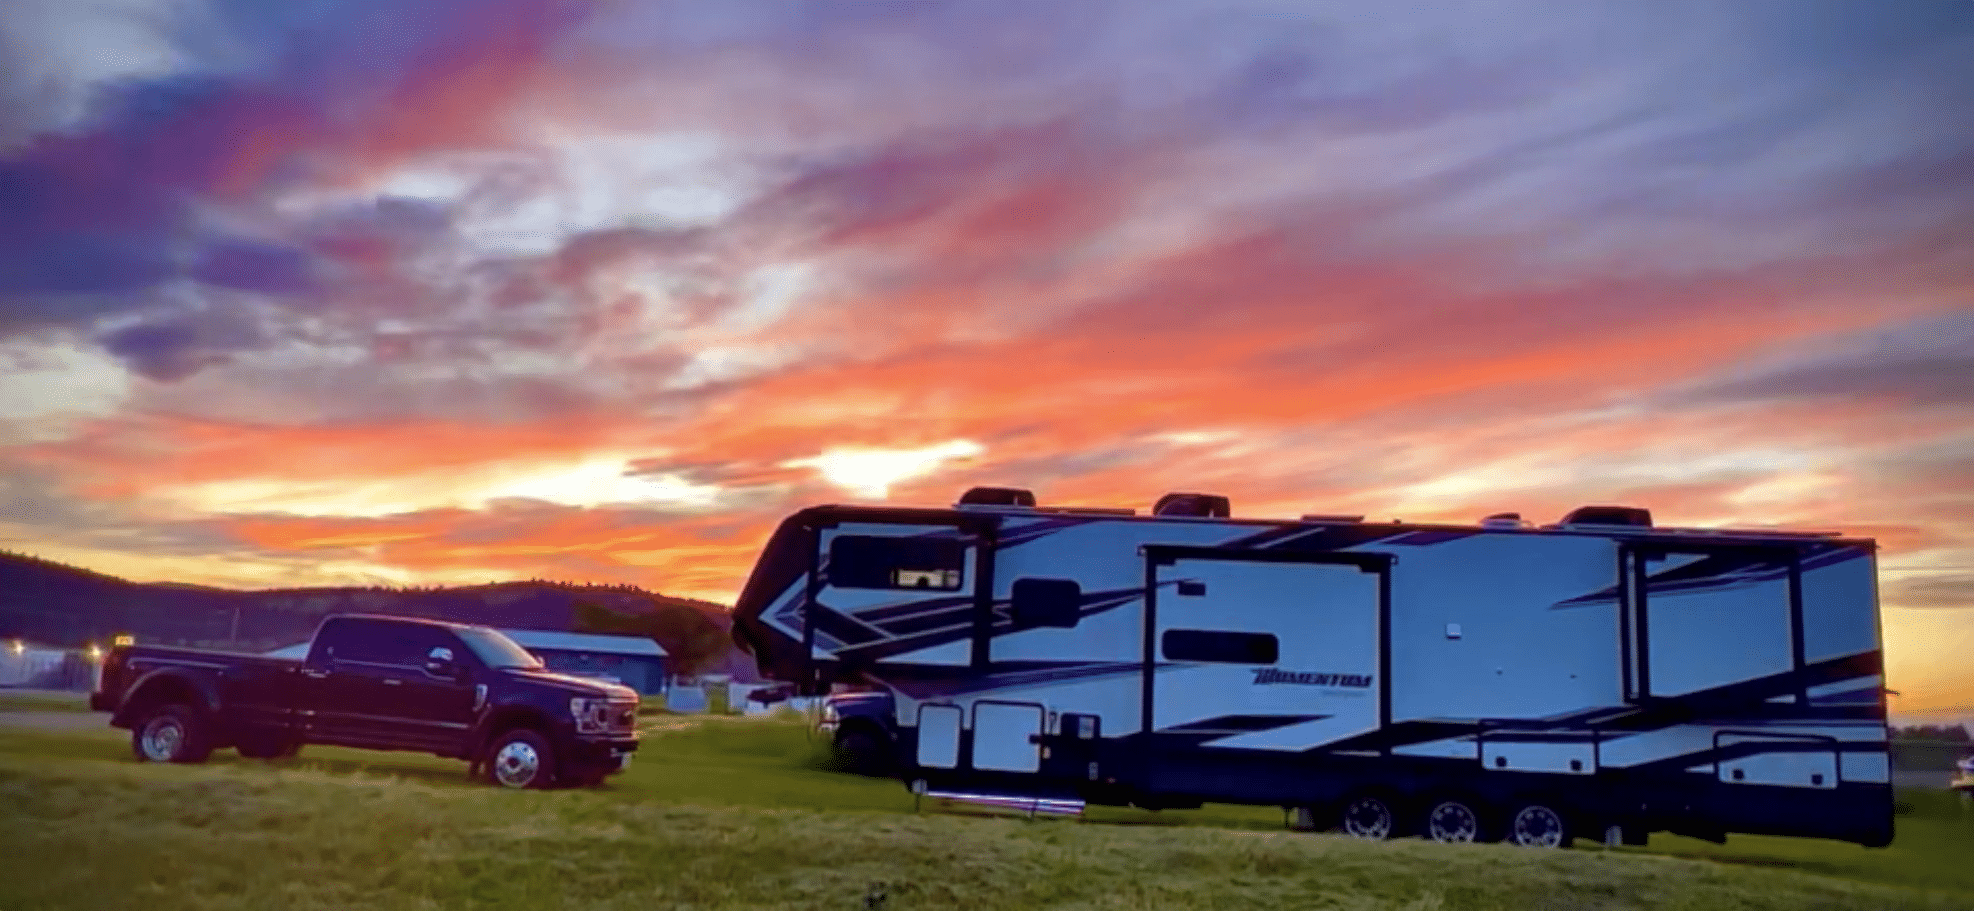 My Bucket List Day RV and Truck with a Sunset